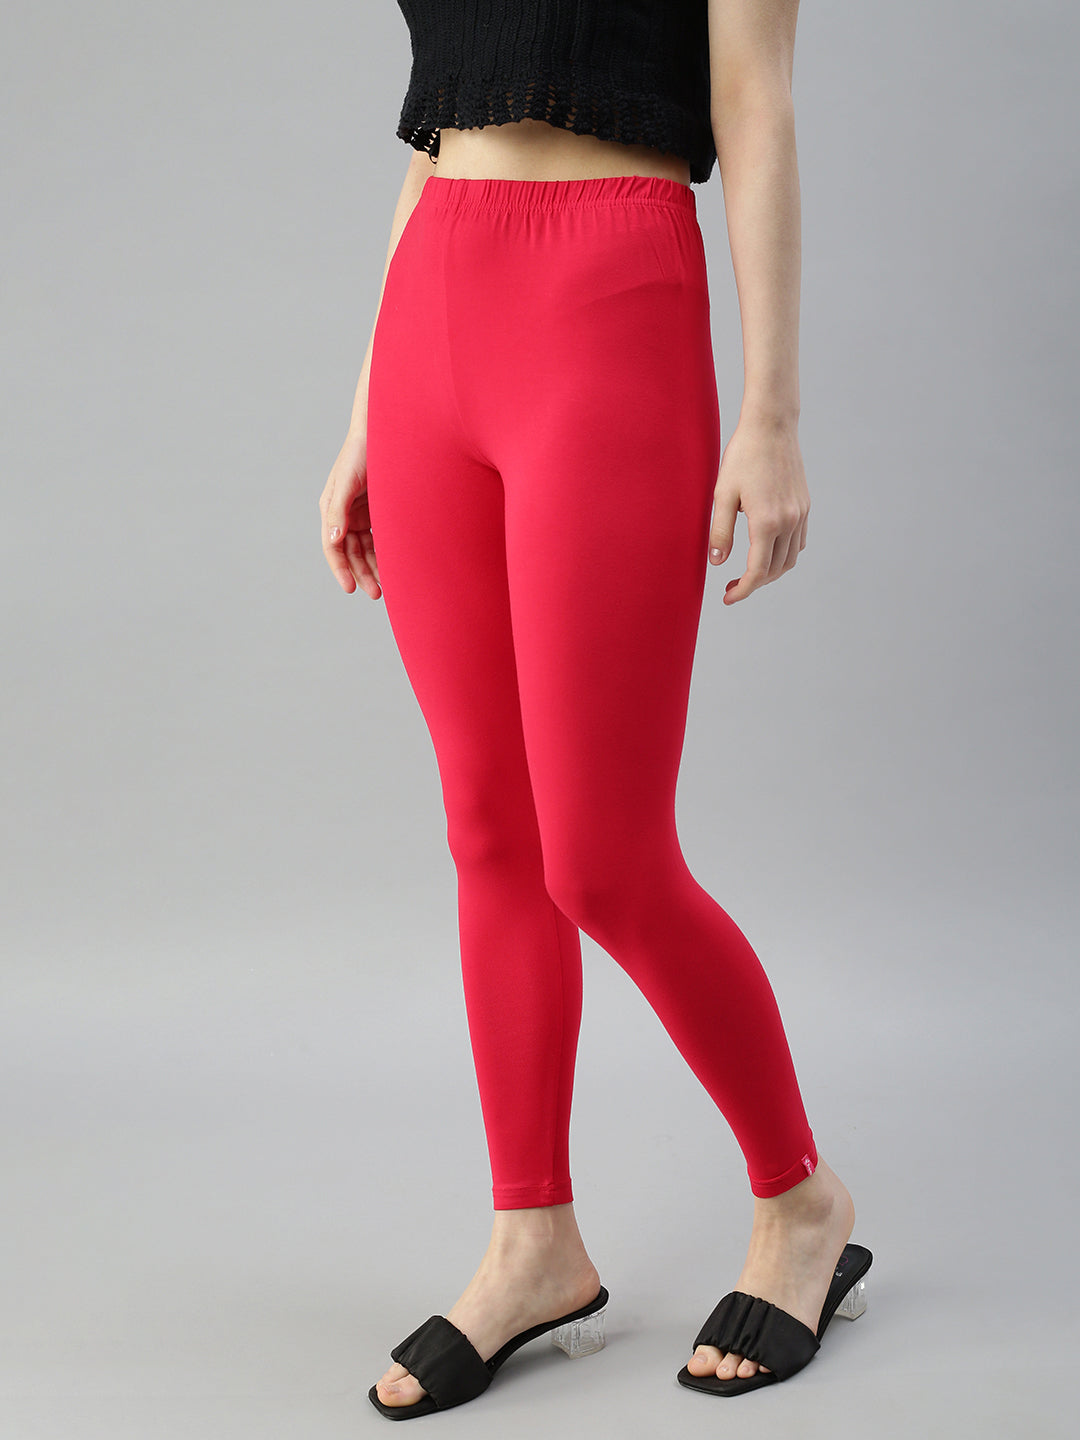 Prisma's Crimson Red Ankle Leggings for Comfortable Style